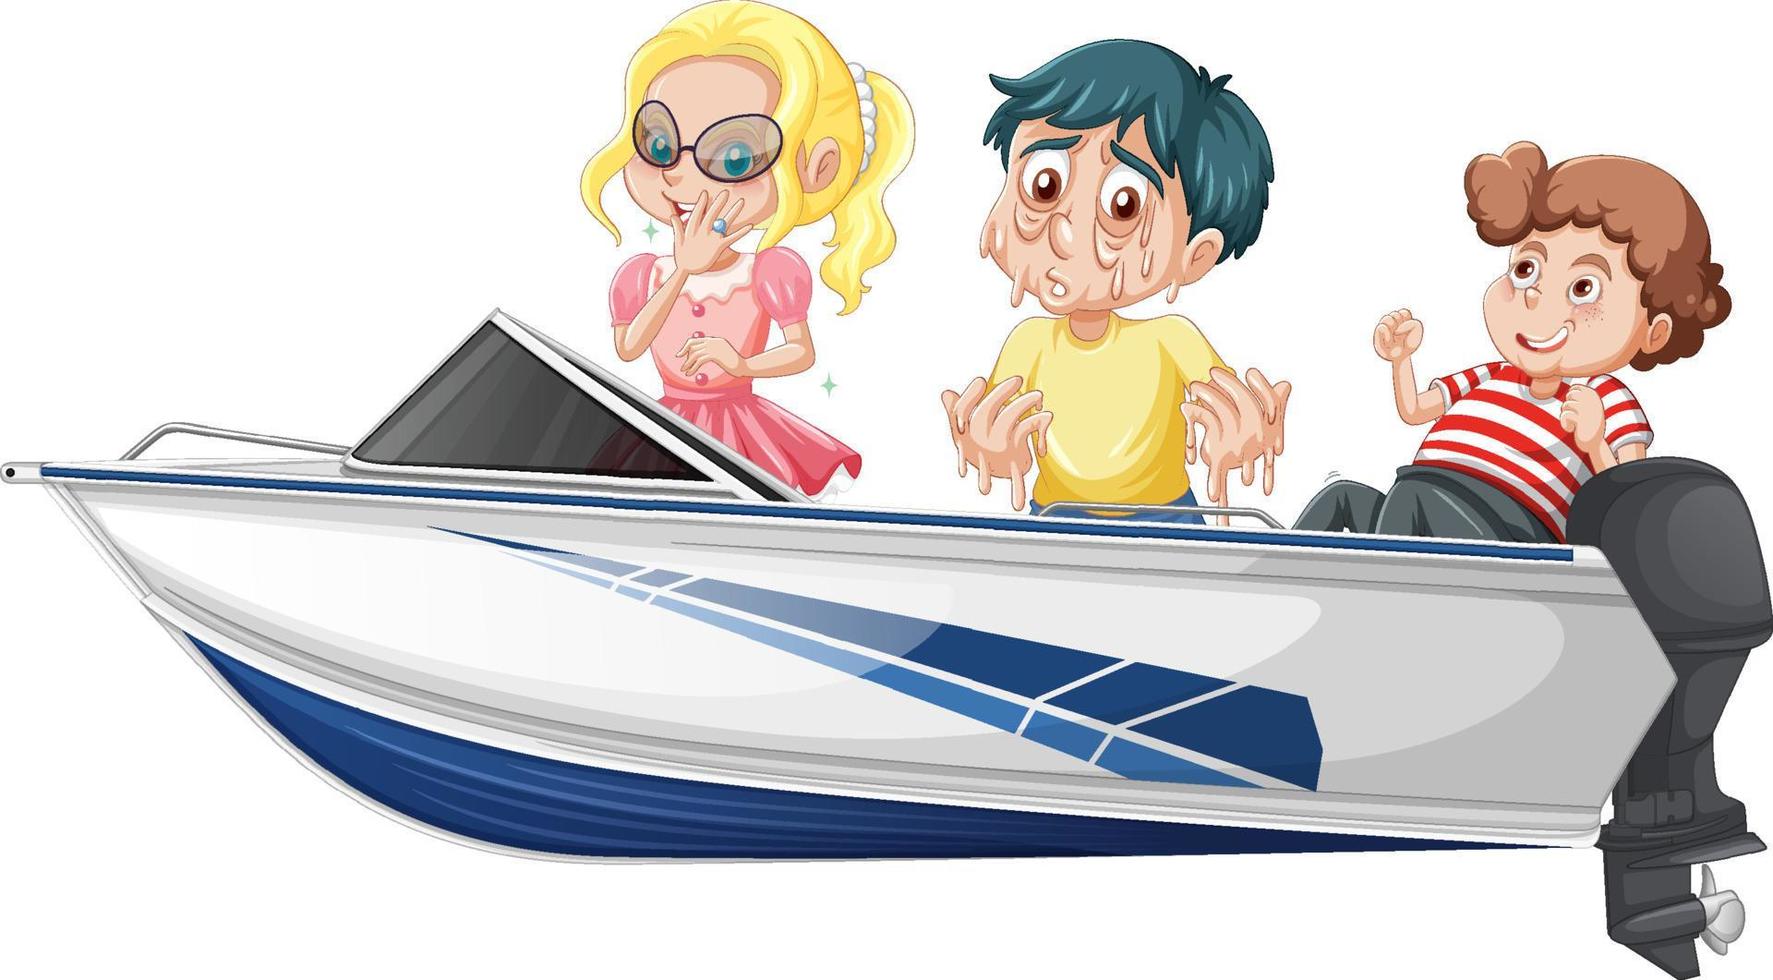 Boy and girl sitting on a speed boat on a white background vector